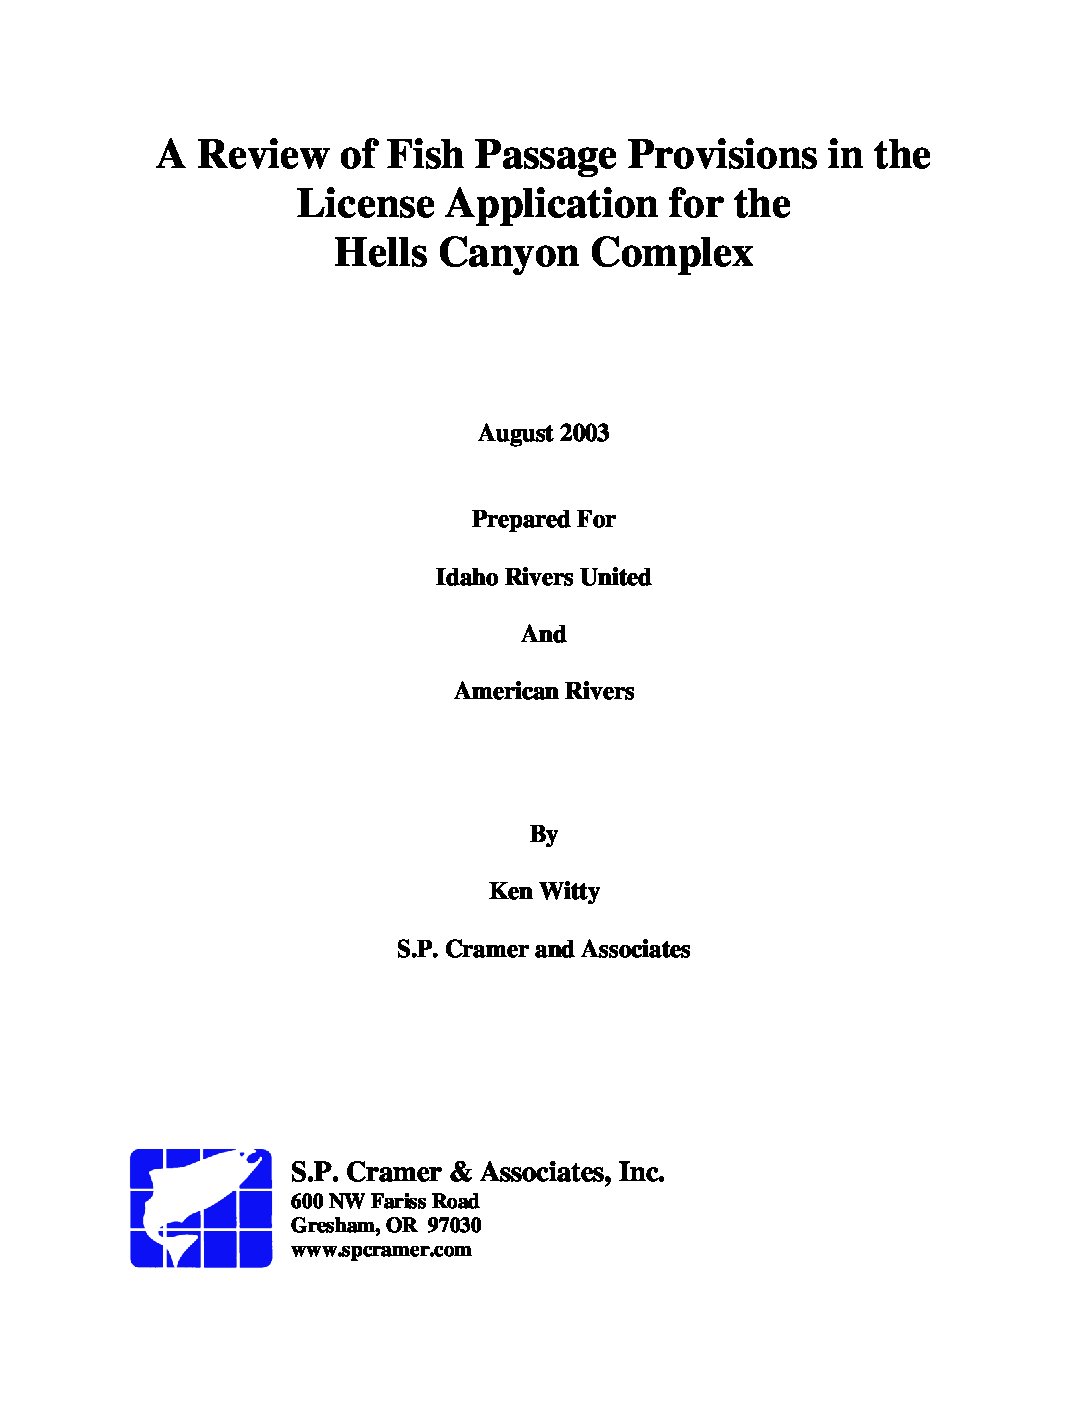 A Review of Fish Passage Provisions in the License Application for the  Hells Canyon Complex